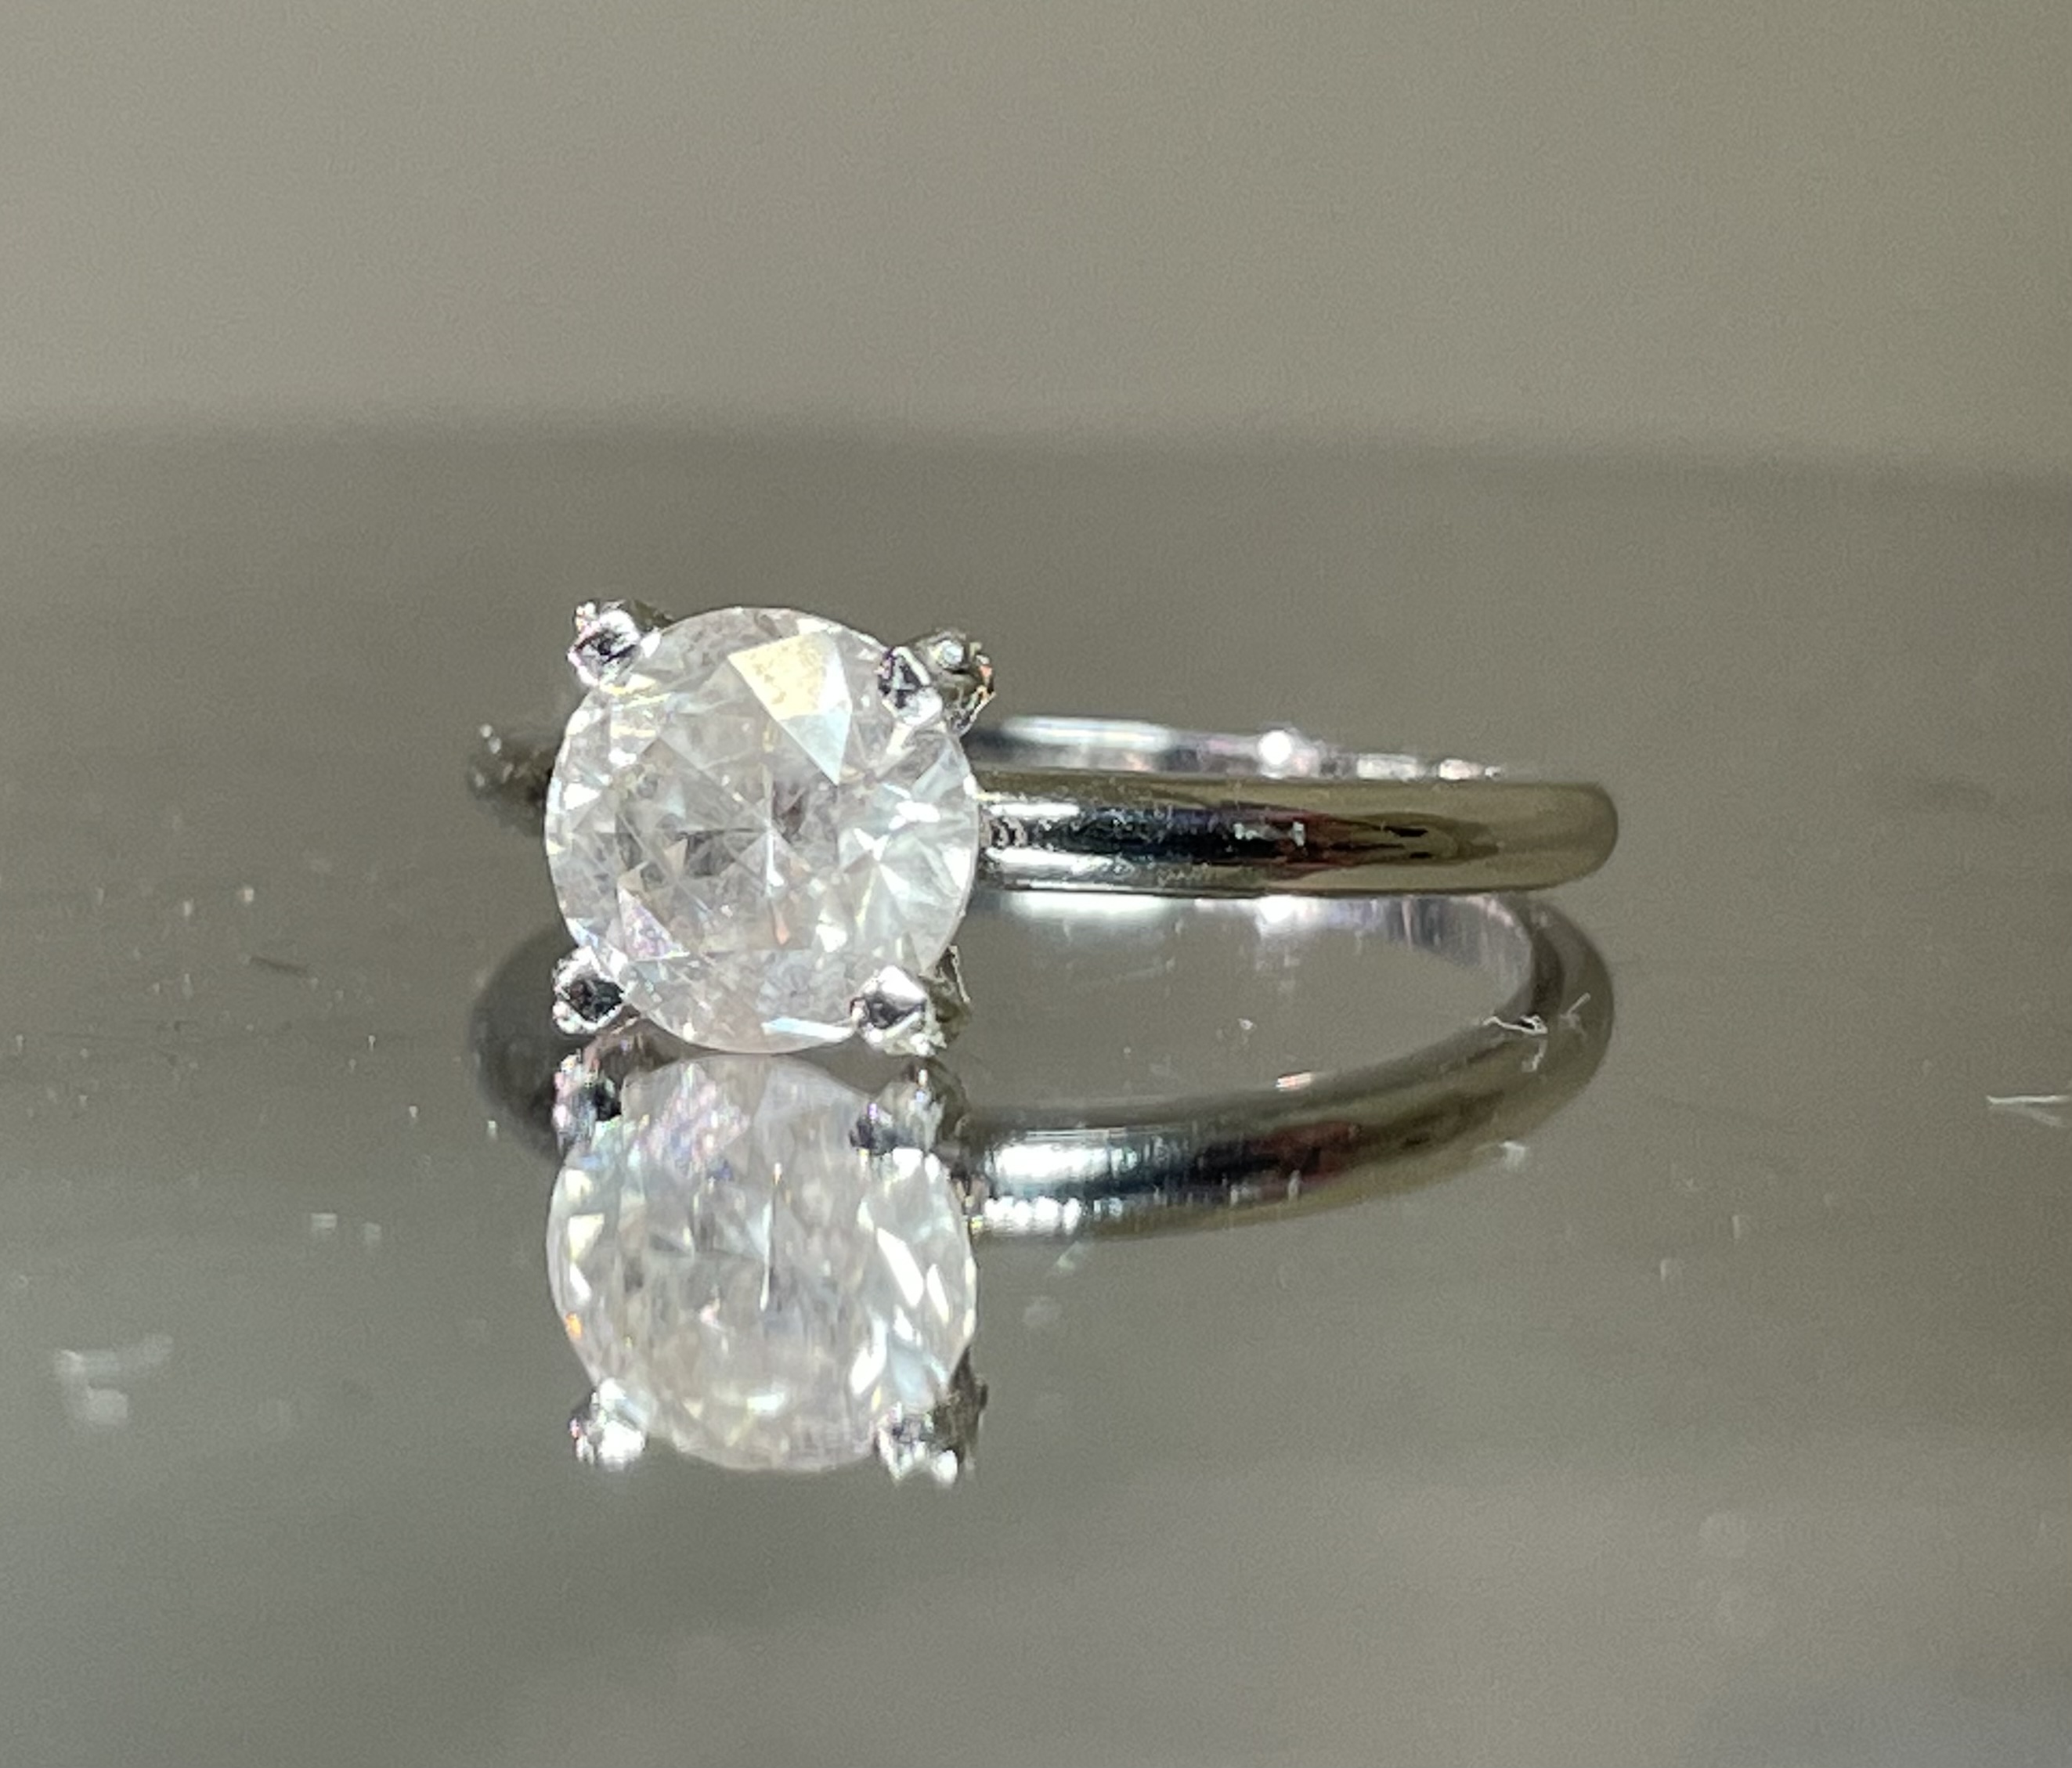 Beautiful Natural 1.72 CT Solitaire Diamond Ring With 18k Gold - Image 5 of 13